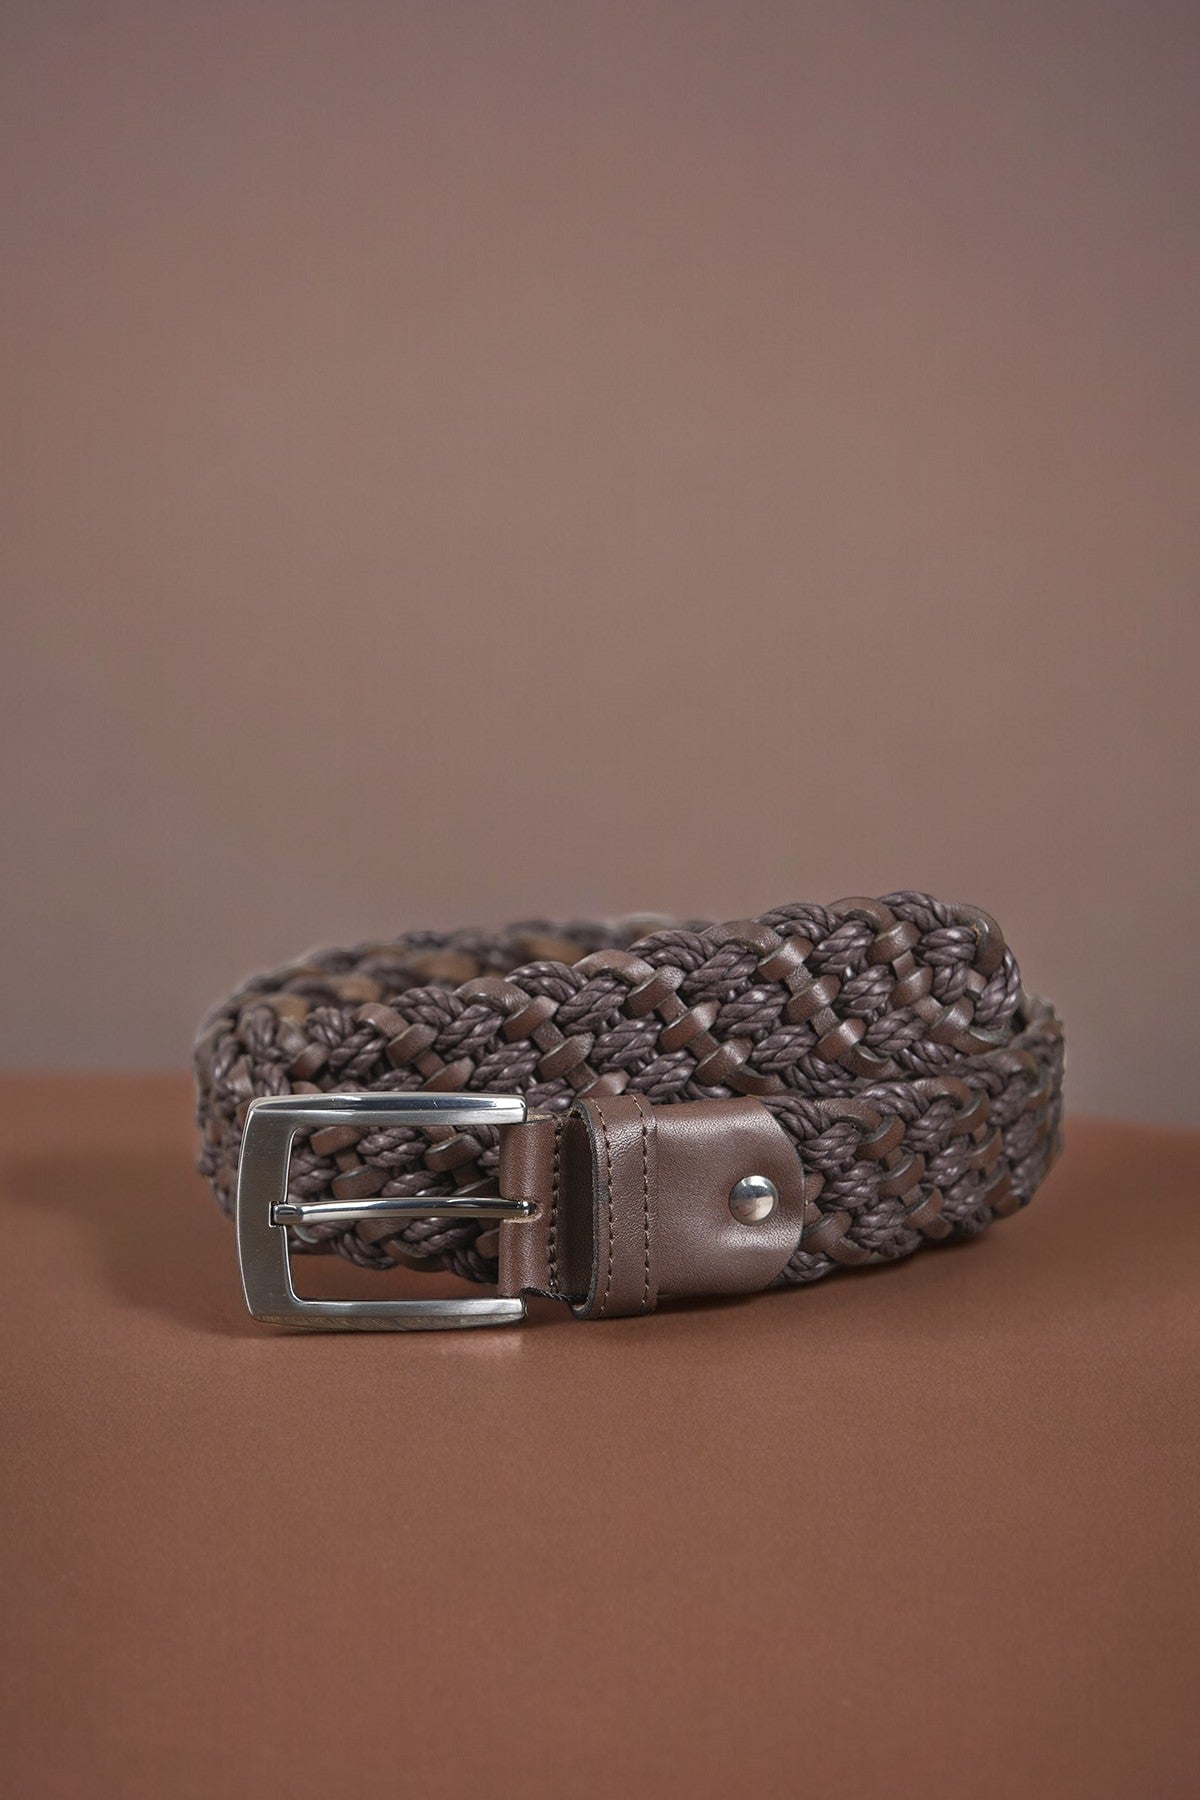 Hand Knitted Leather Belt with Different Color Options  99percenthandmade   